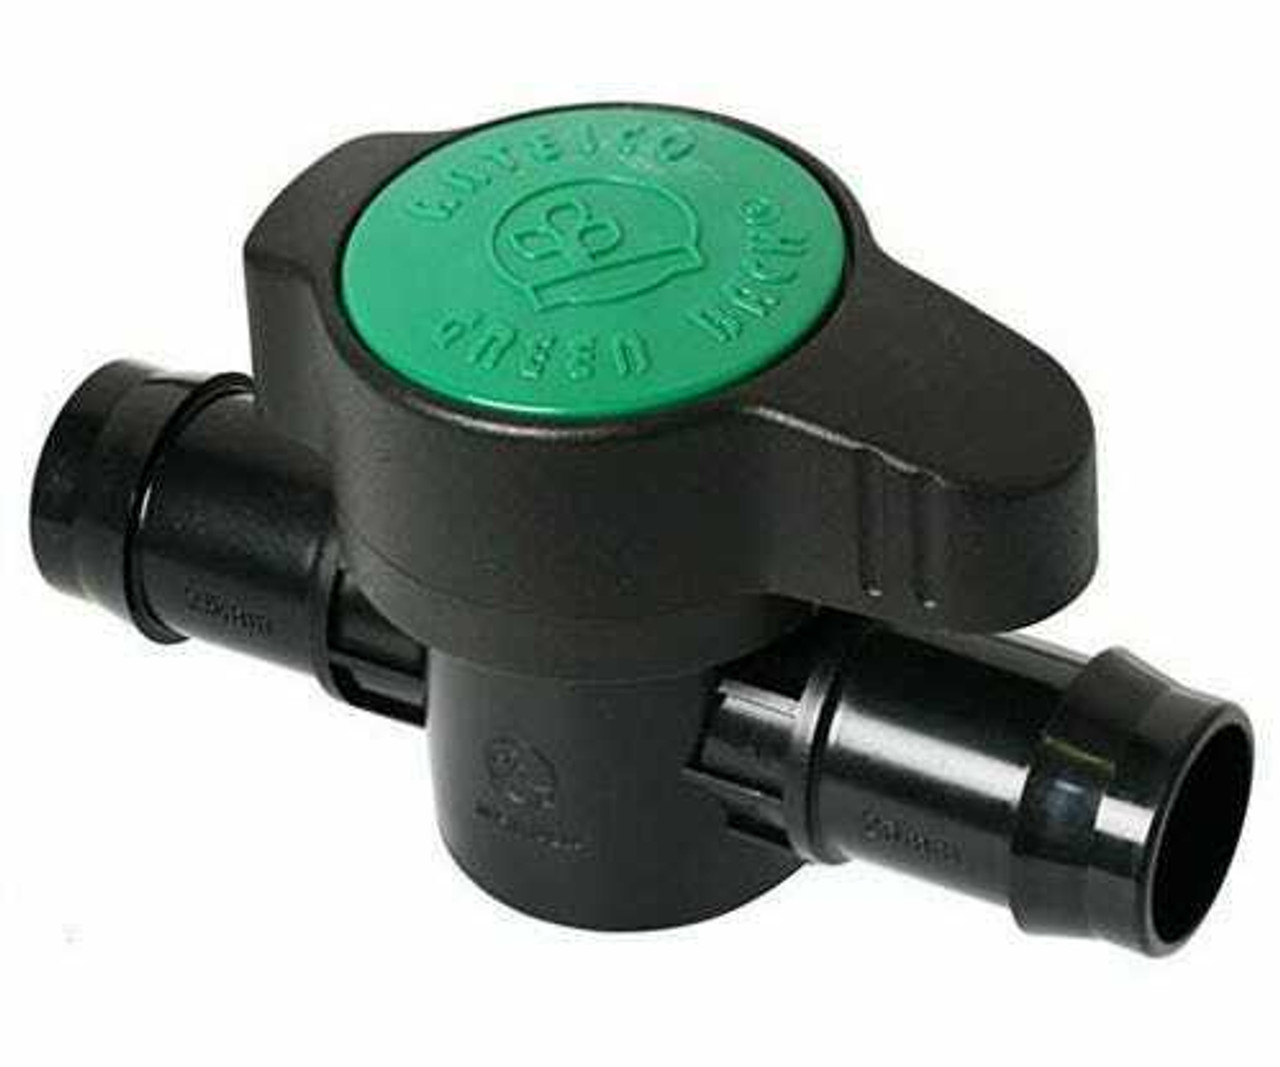 Stopcock Valve 1/2", pack of 10 - 1